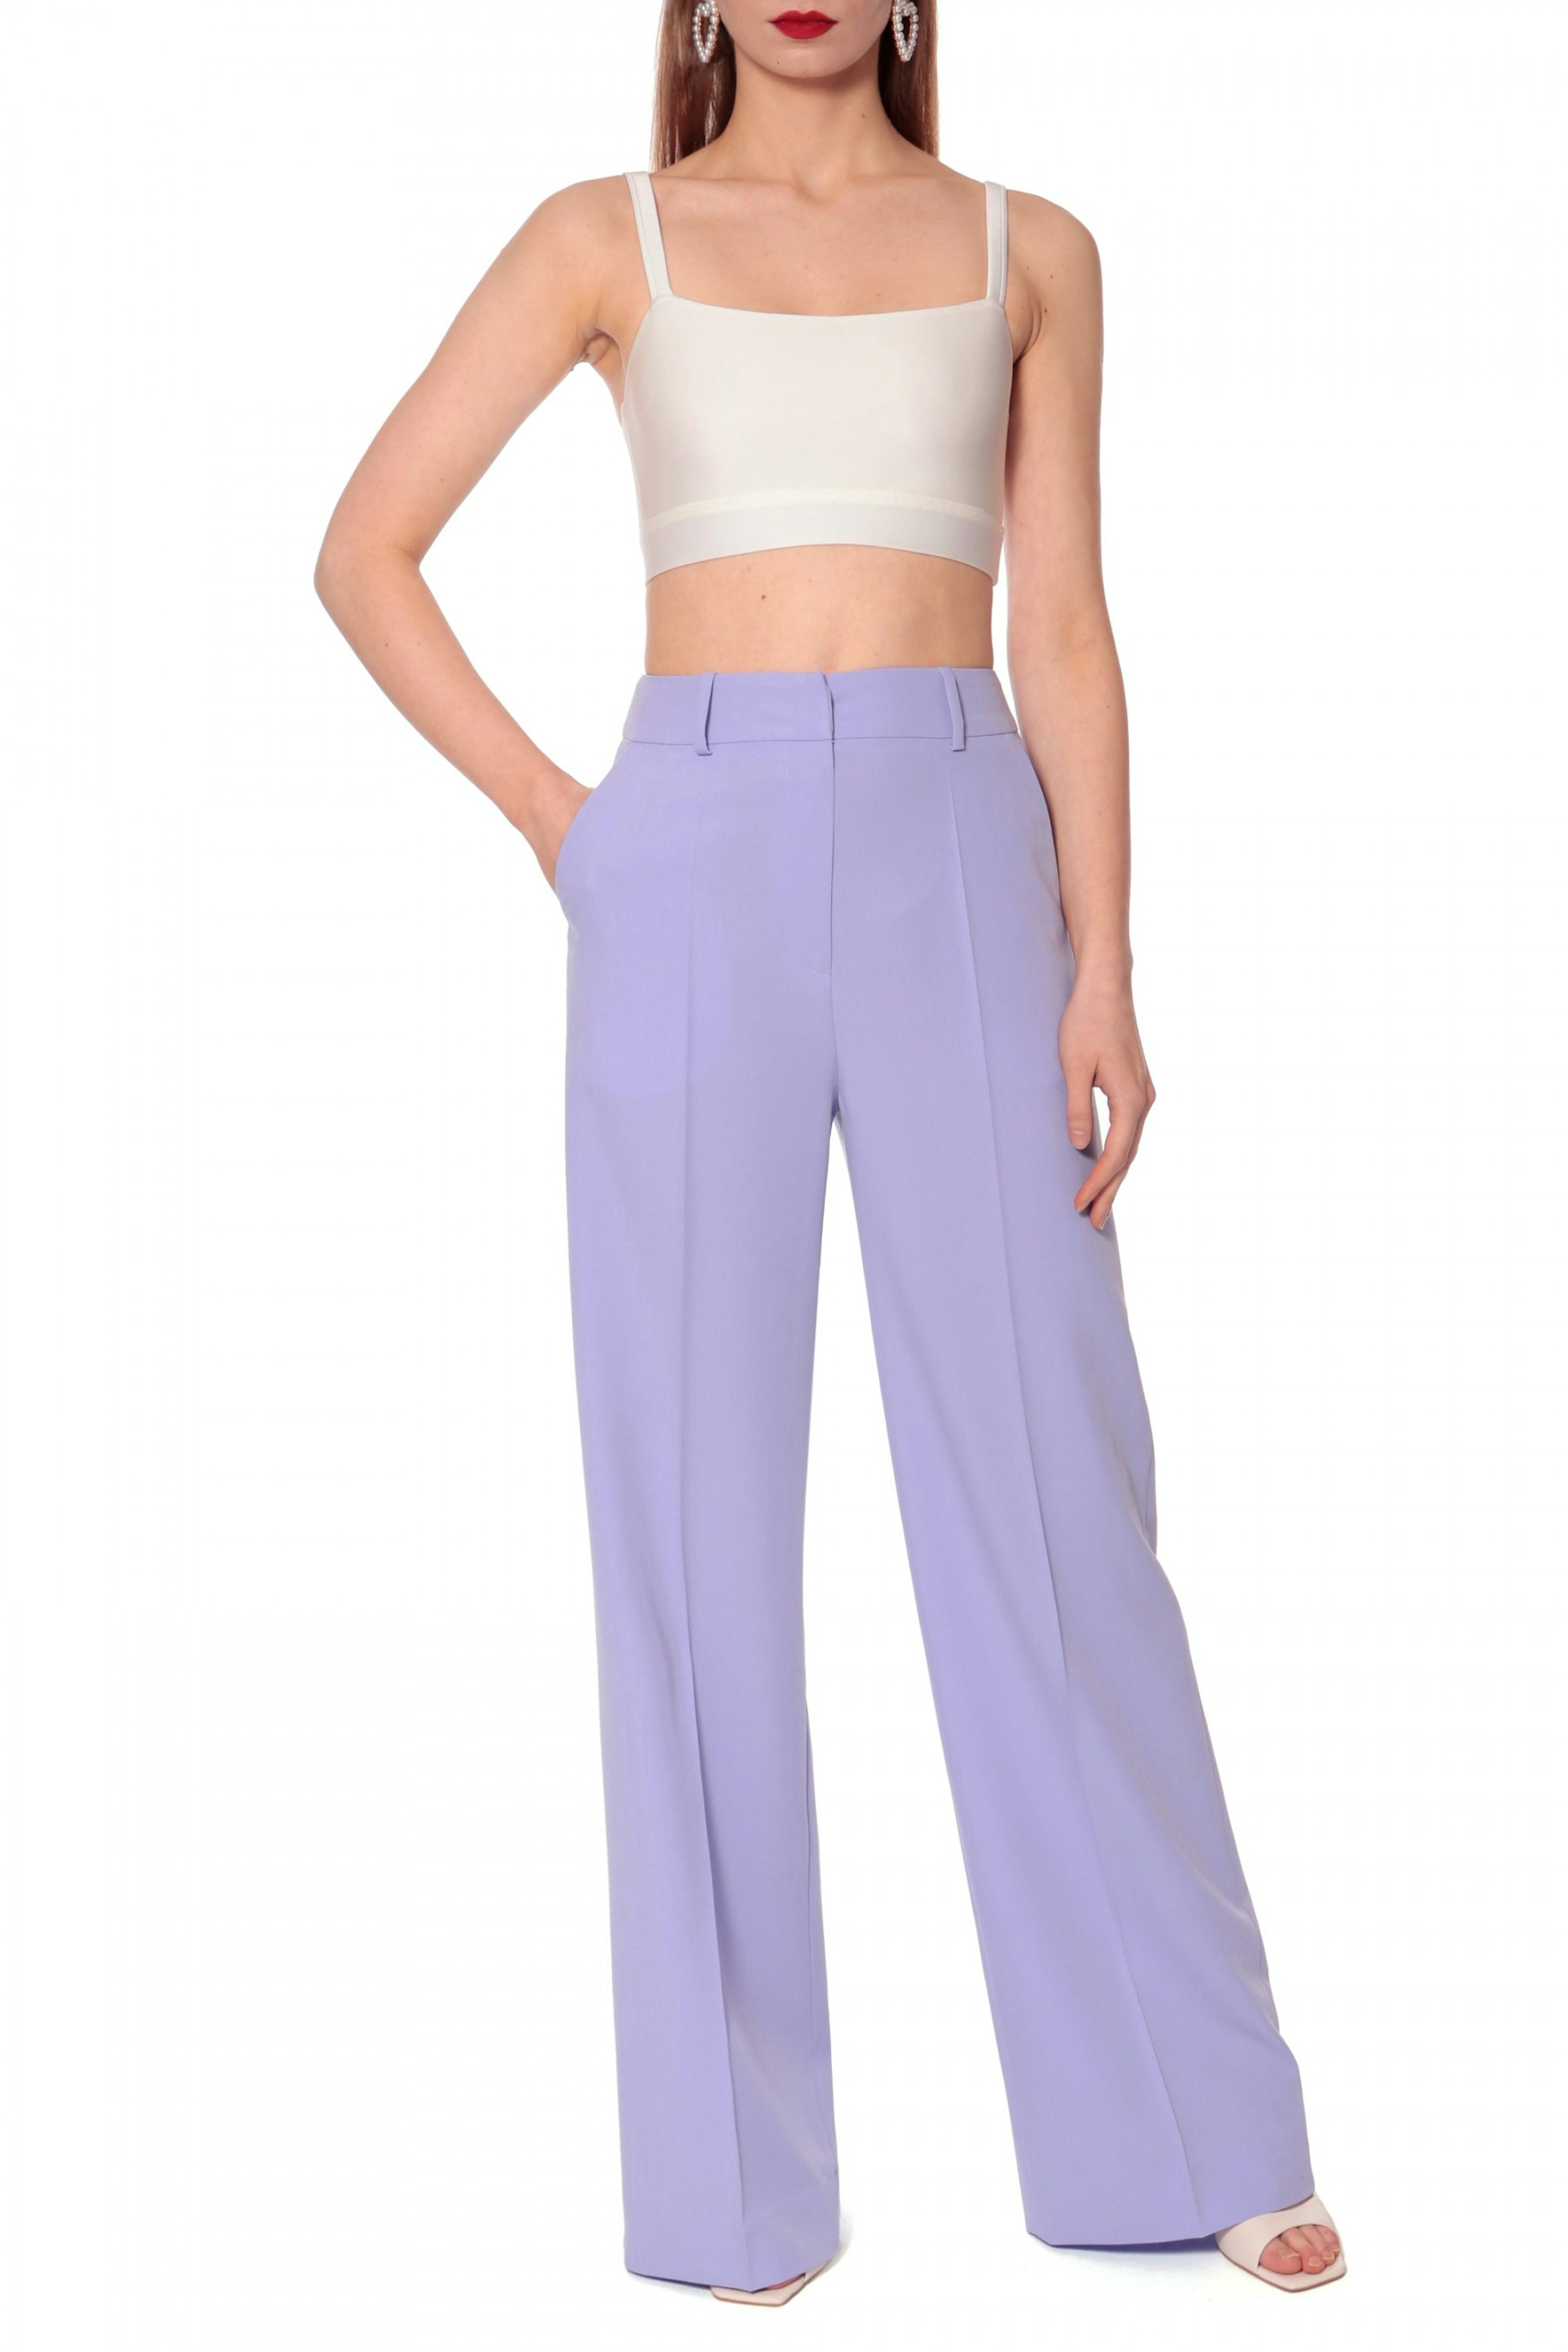 Shop Pants Suzie Lavender from AGGI at Seezona